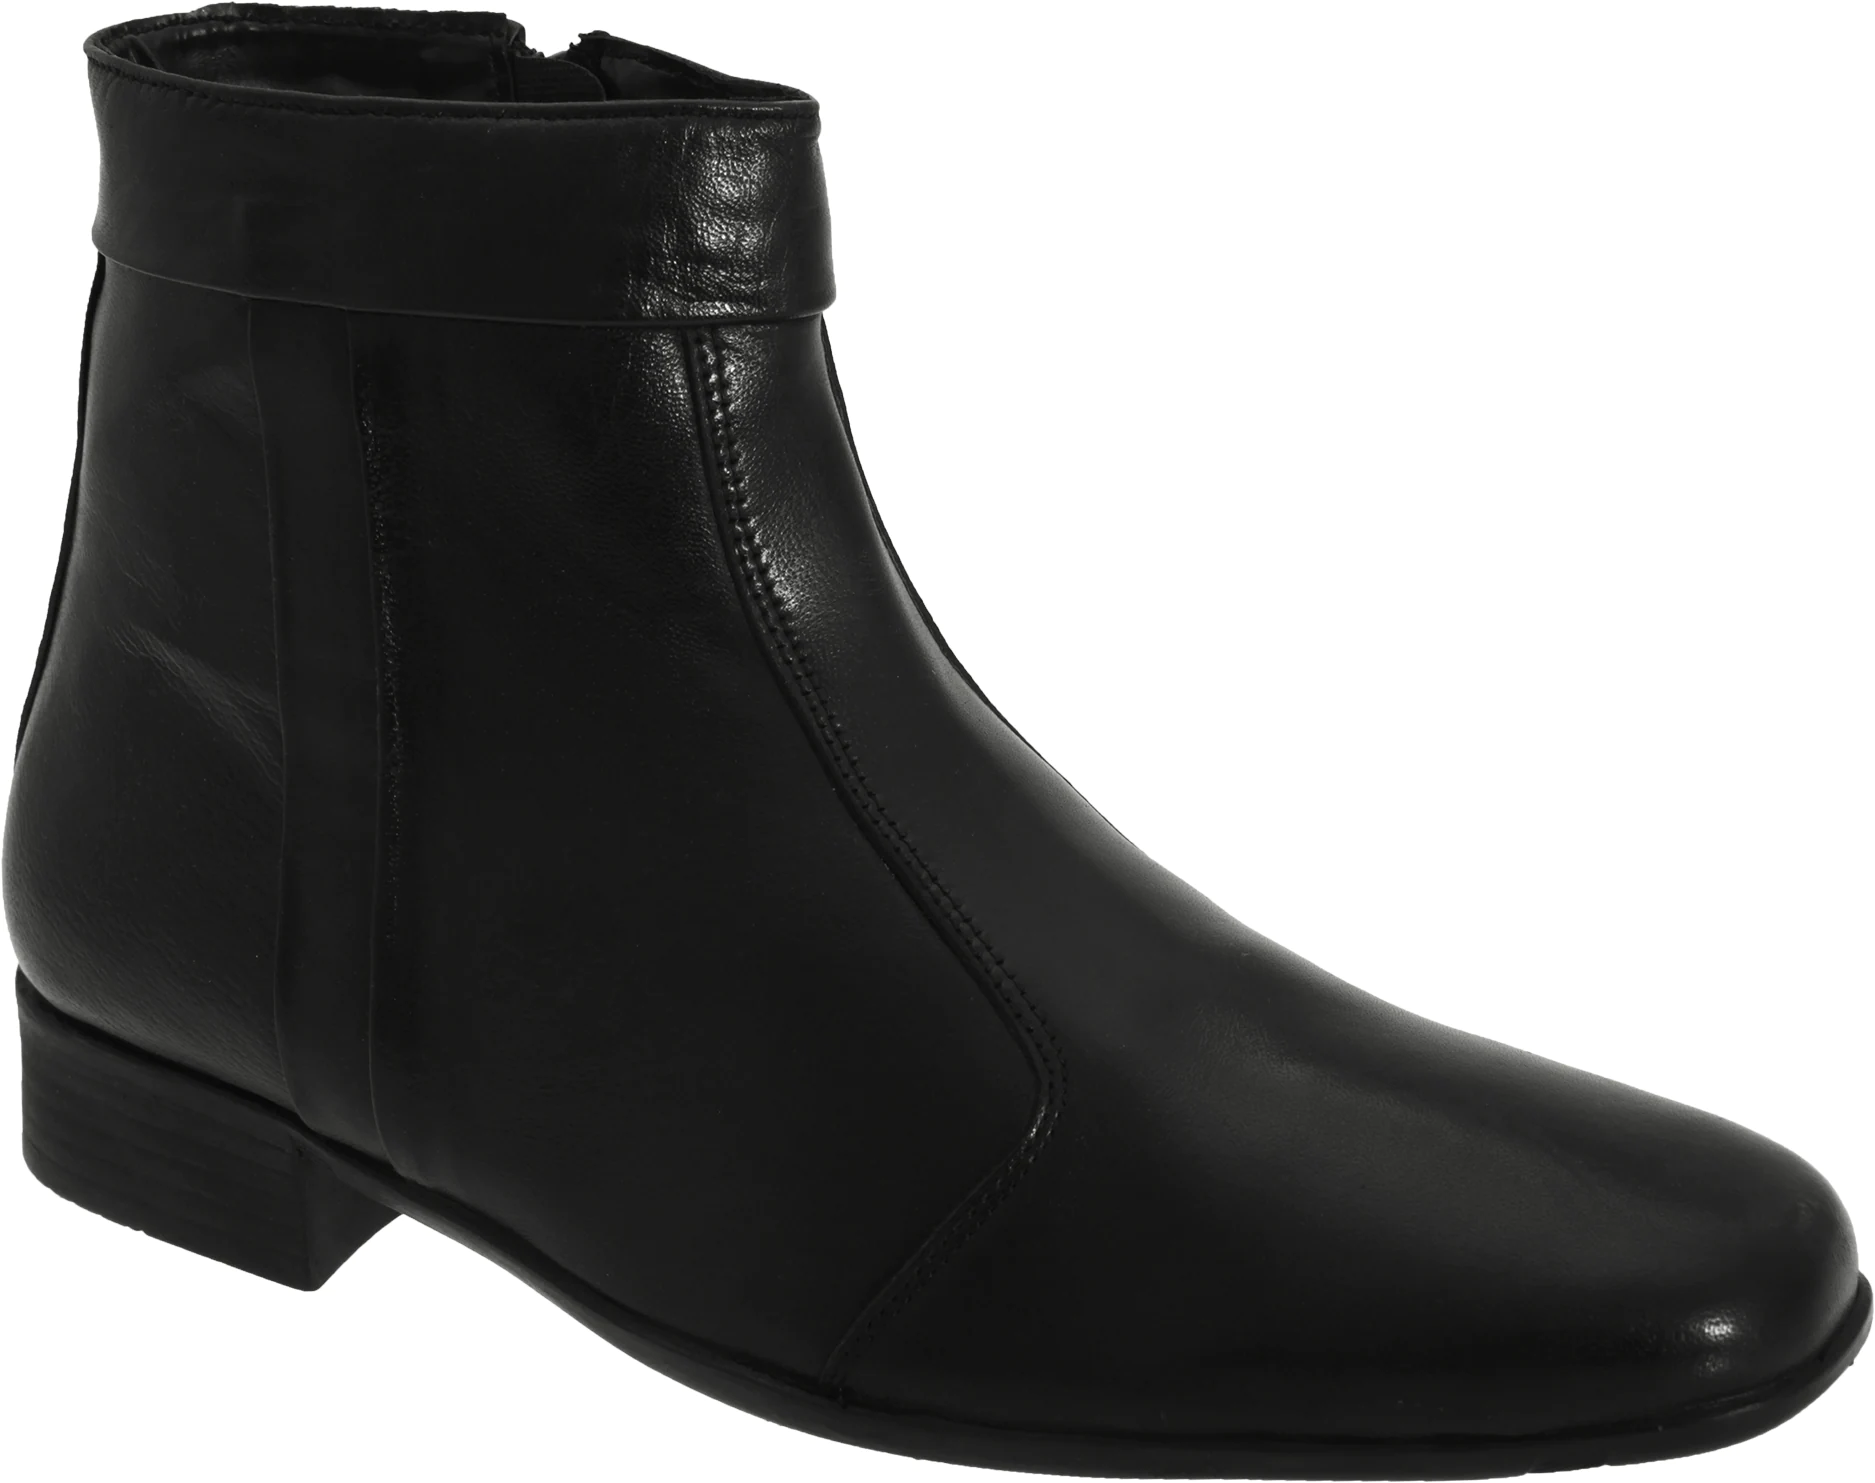 Megableu Boots Ankle Boots With Low Heel